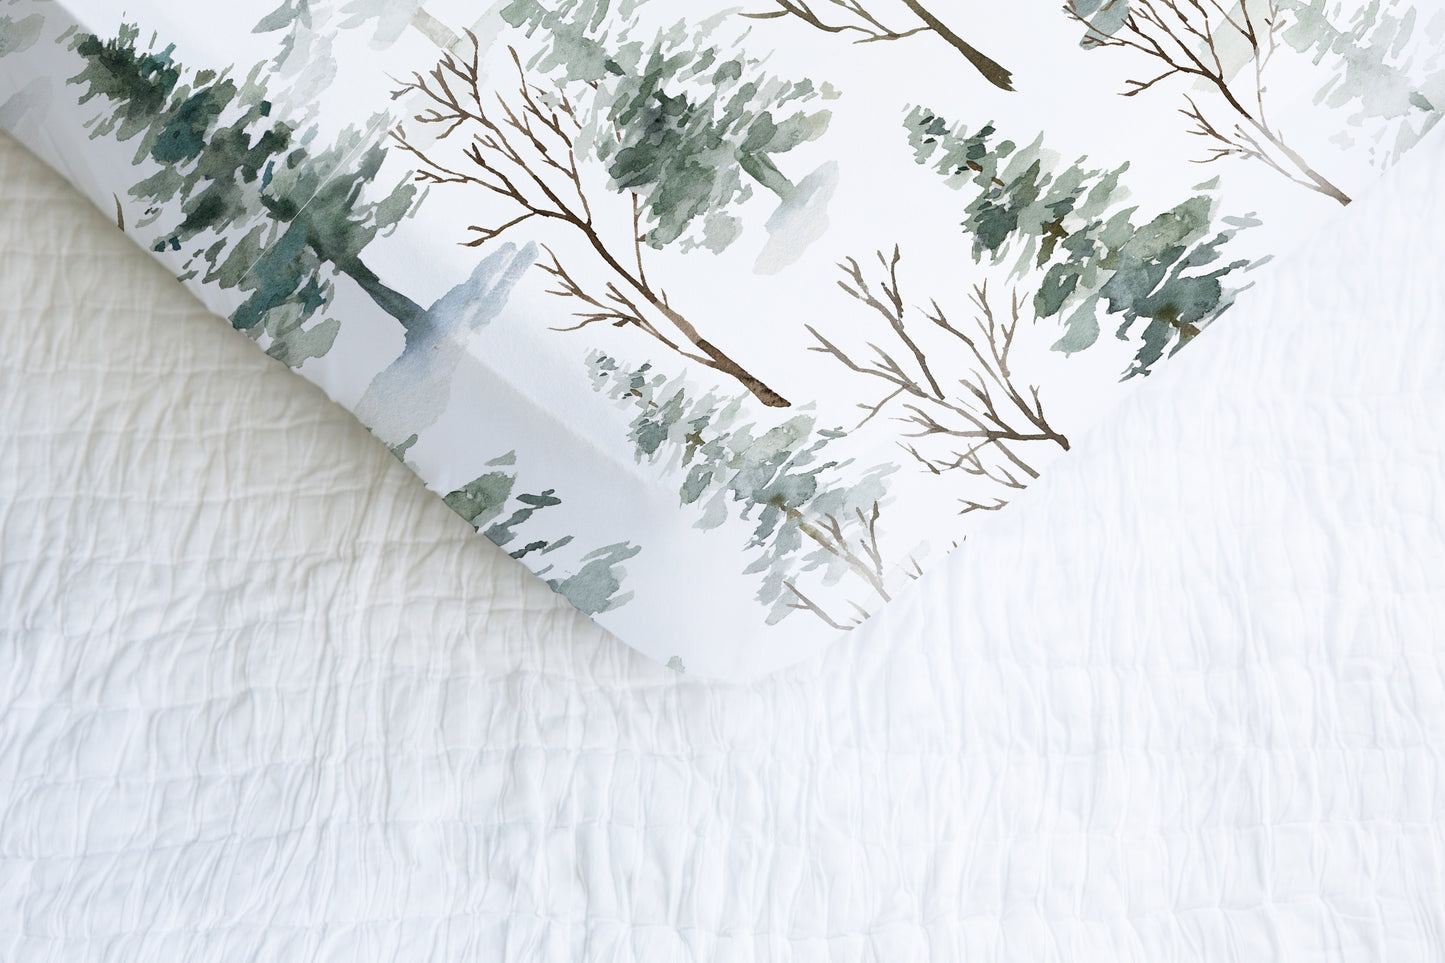 Forest Crib Sheet, Pine Tree Nursery Bedding - Enchanted Forest